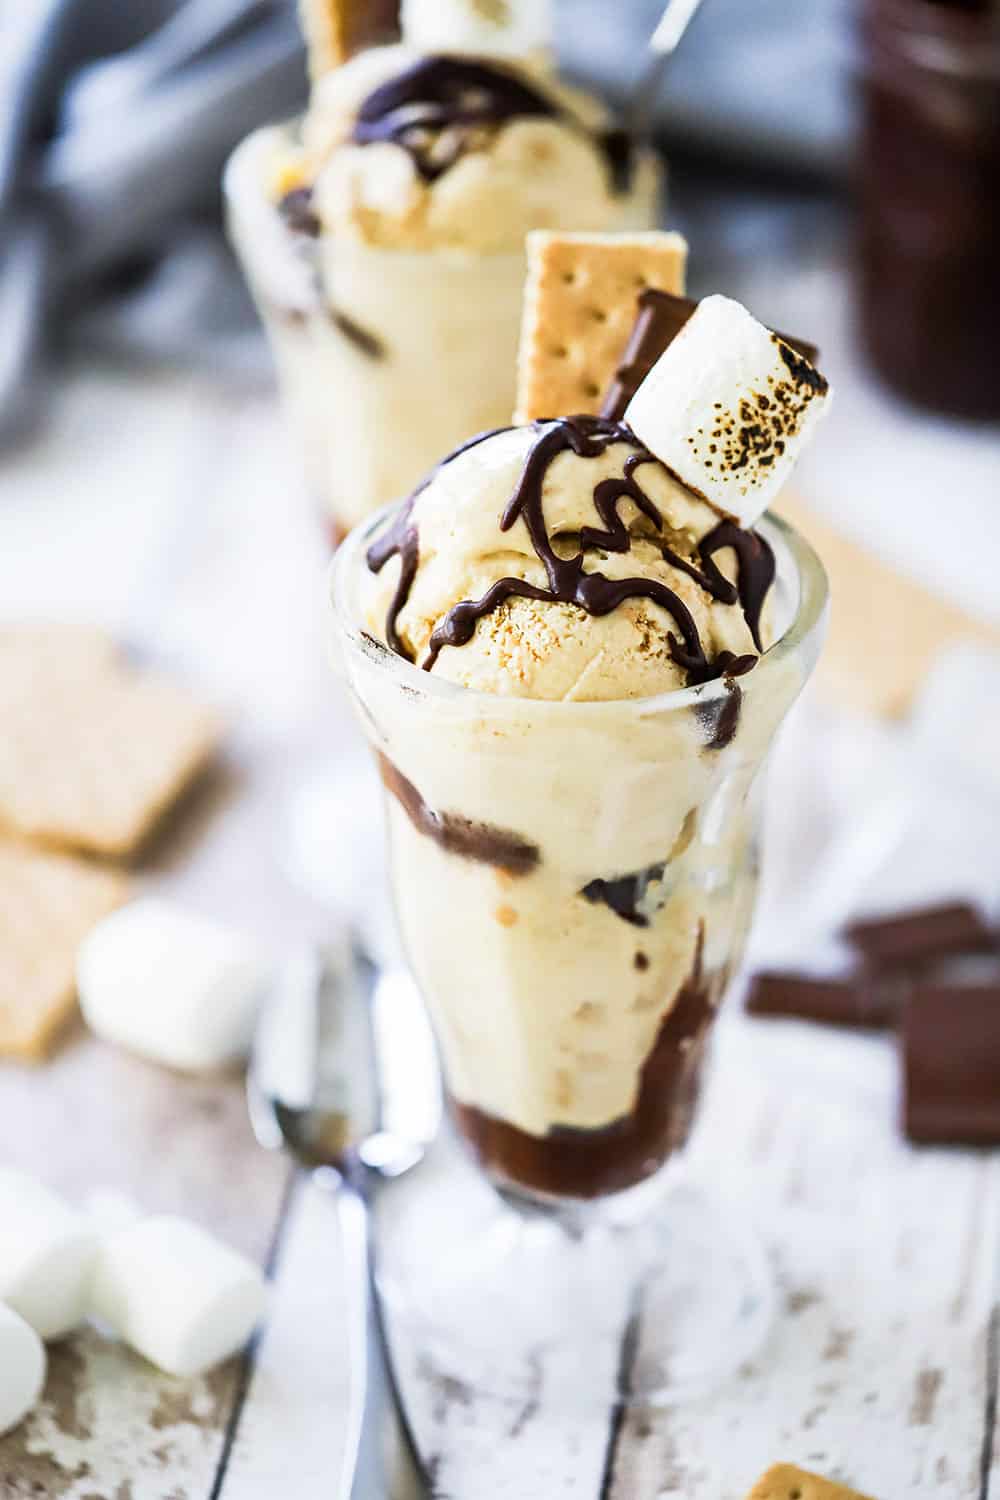 An ice cream parlor glass holder filled with s'mores ice cream topped with a piece of graham cracker, a piece of chocolate and a toasted marshmallow.